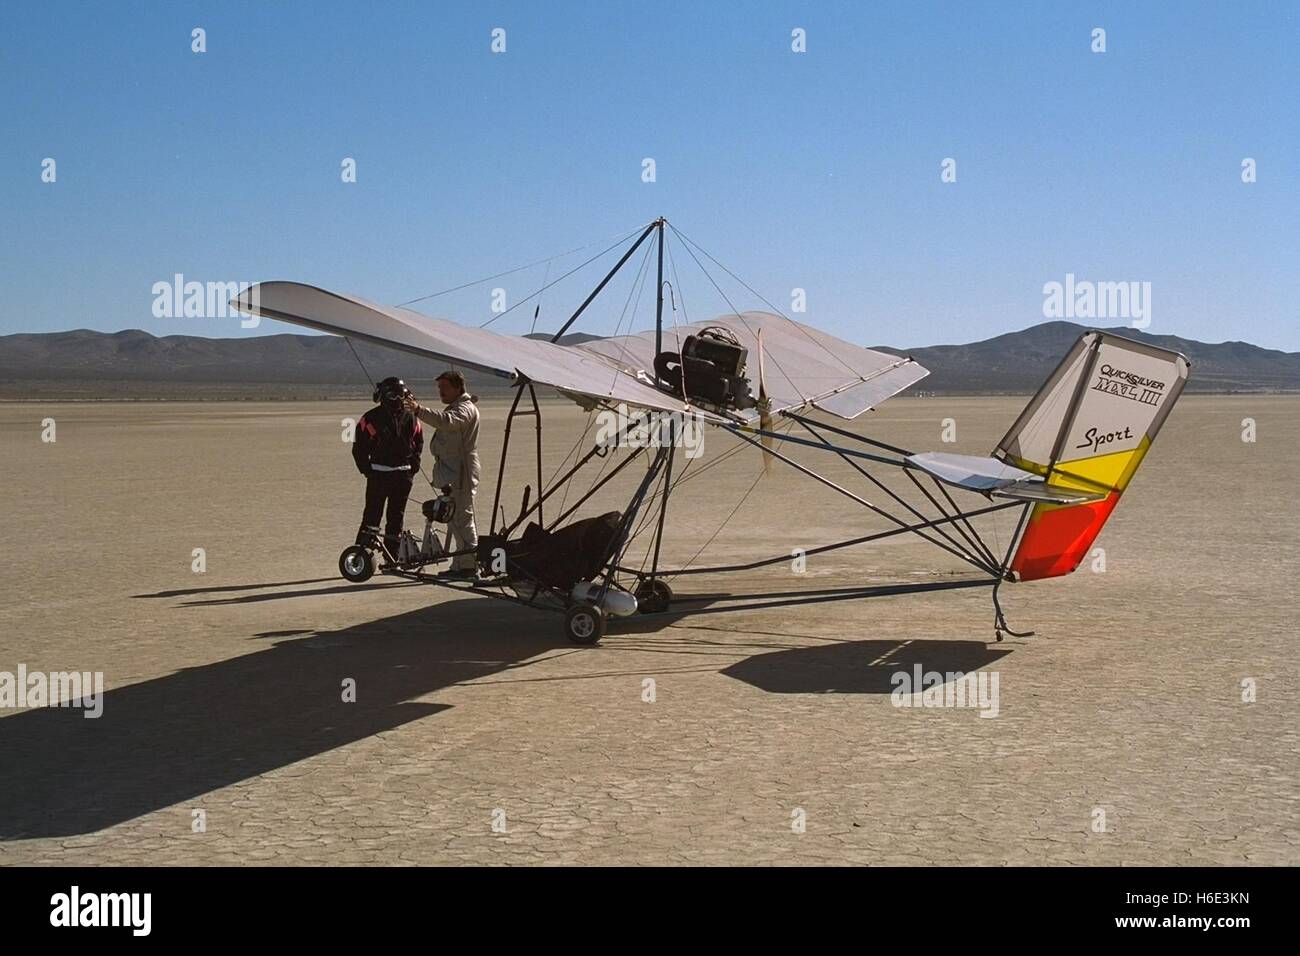 Pilots stand near a Quicksilver MXL ultralight aircraft at the El Mirage Dry Lake Off-Highway Vehicle Recreation Area in the Mojave Desert near Los Angeles, California. Stock Photo